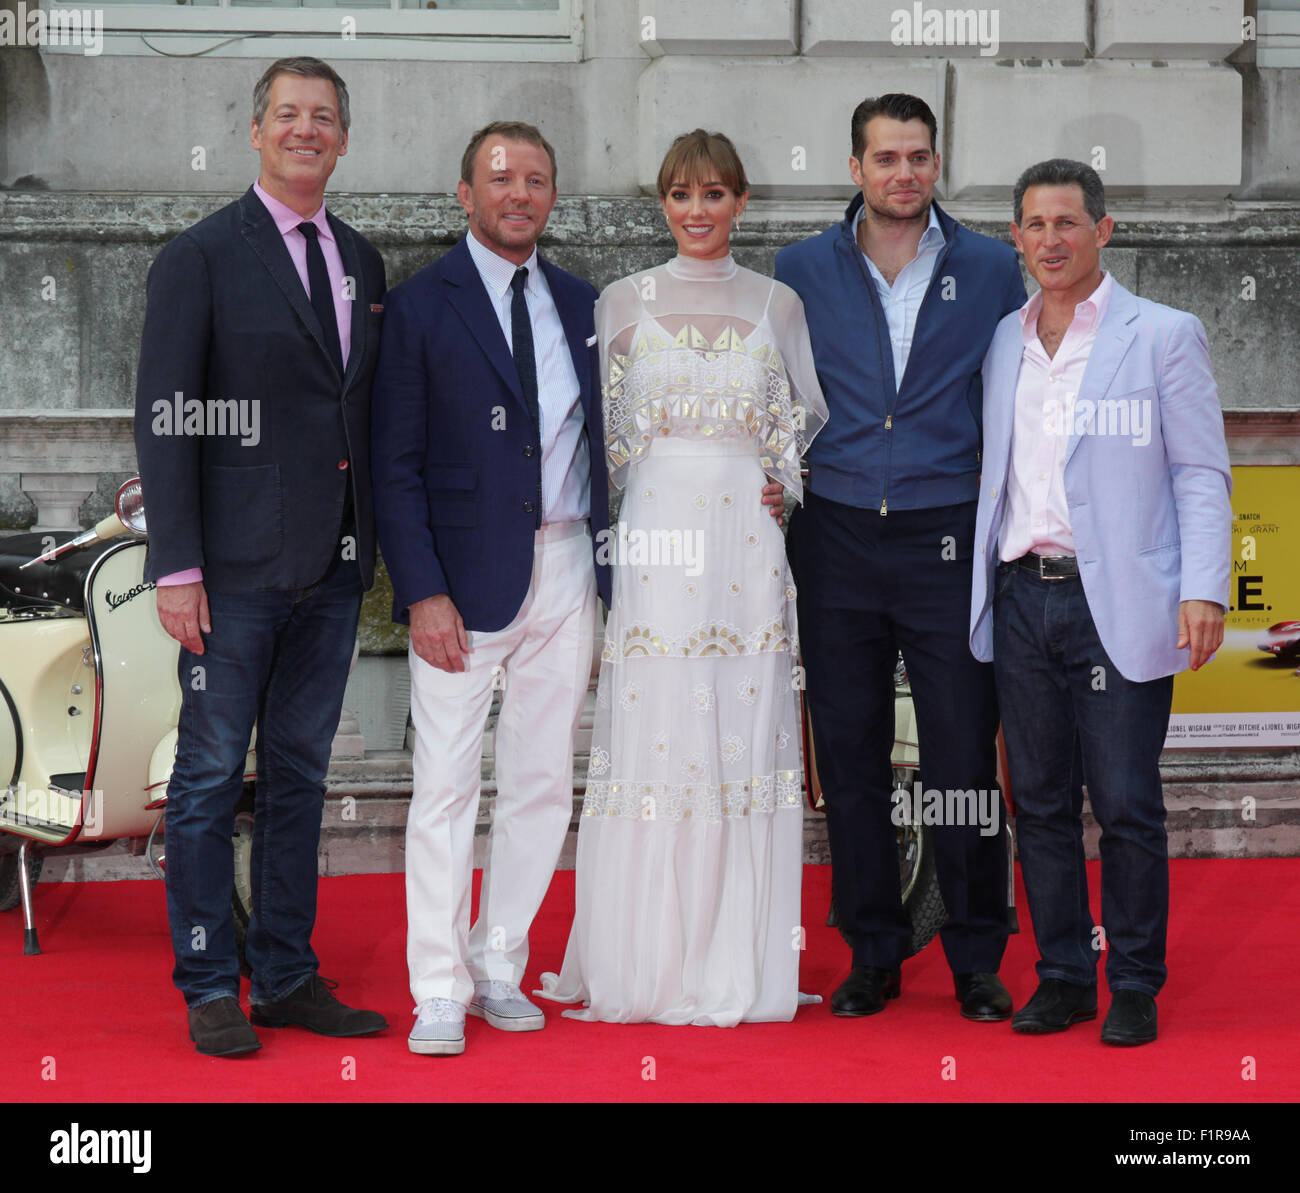 London, UK, 7th Aug 2015: (L-R) Lionel Wigram, Guy Ritchie, Jacqui Ainsley, Henry Cavill and Josh Berger attend The Man from U.N Stock Photo